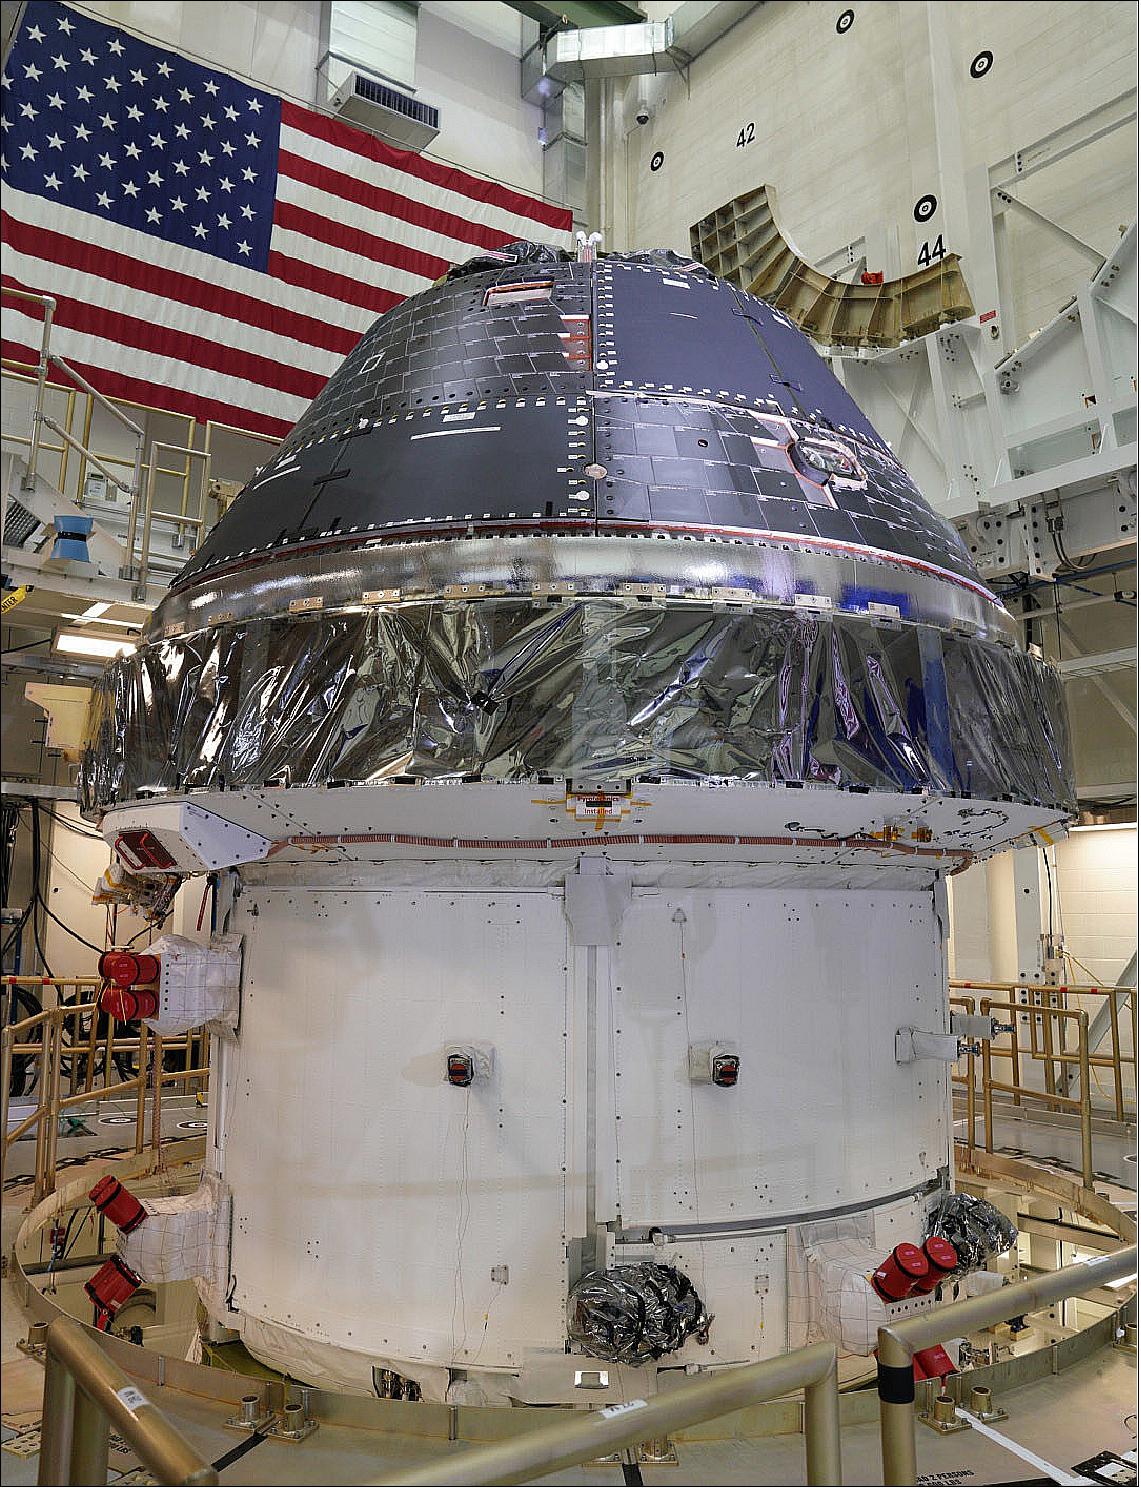 Figure 54: On the 50th anniversary of the Apollo Moon landing, the Lockheed Martin-built Orion capsule for the Artemis 1 mission to the Moon is declared finished (image credit: Lockheed Martin)